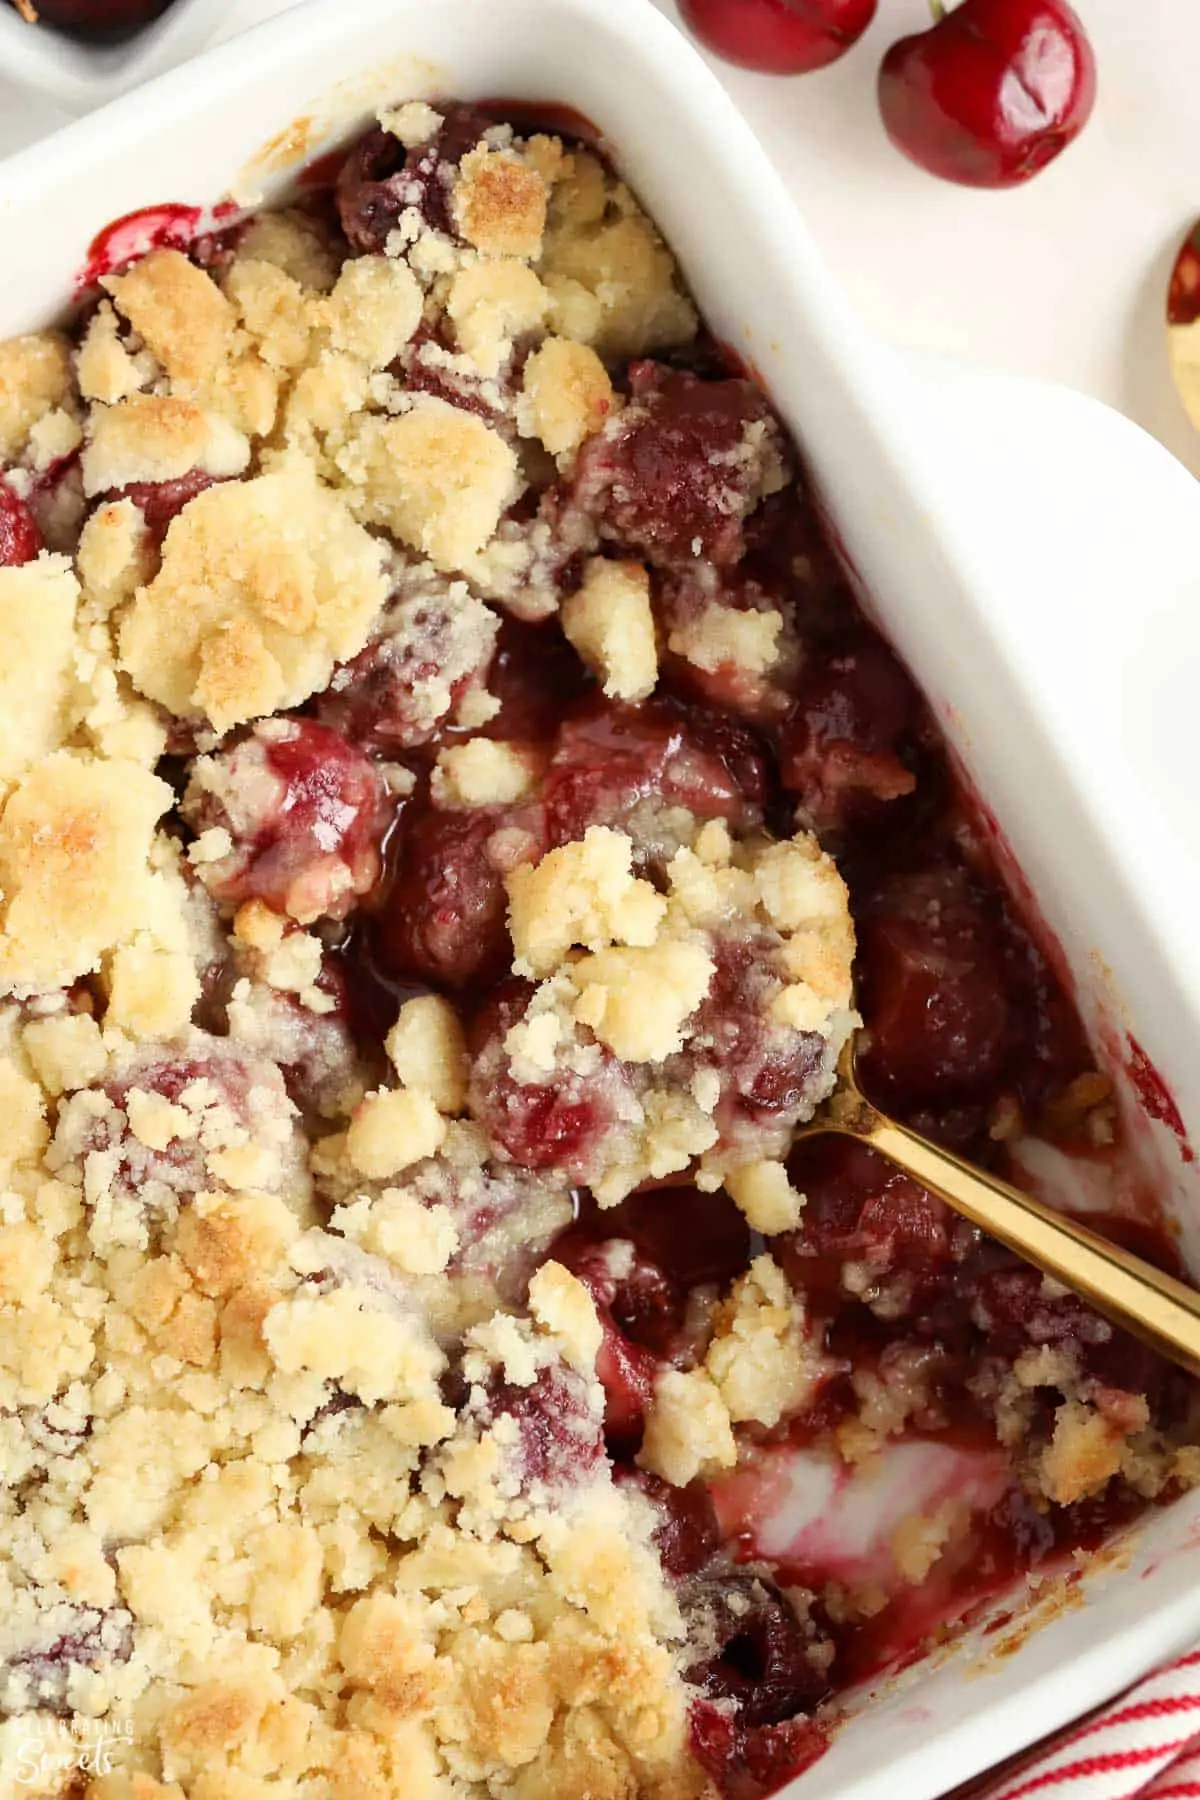 Cherry cobbler in a white baking dish with a gold spoon.